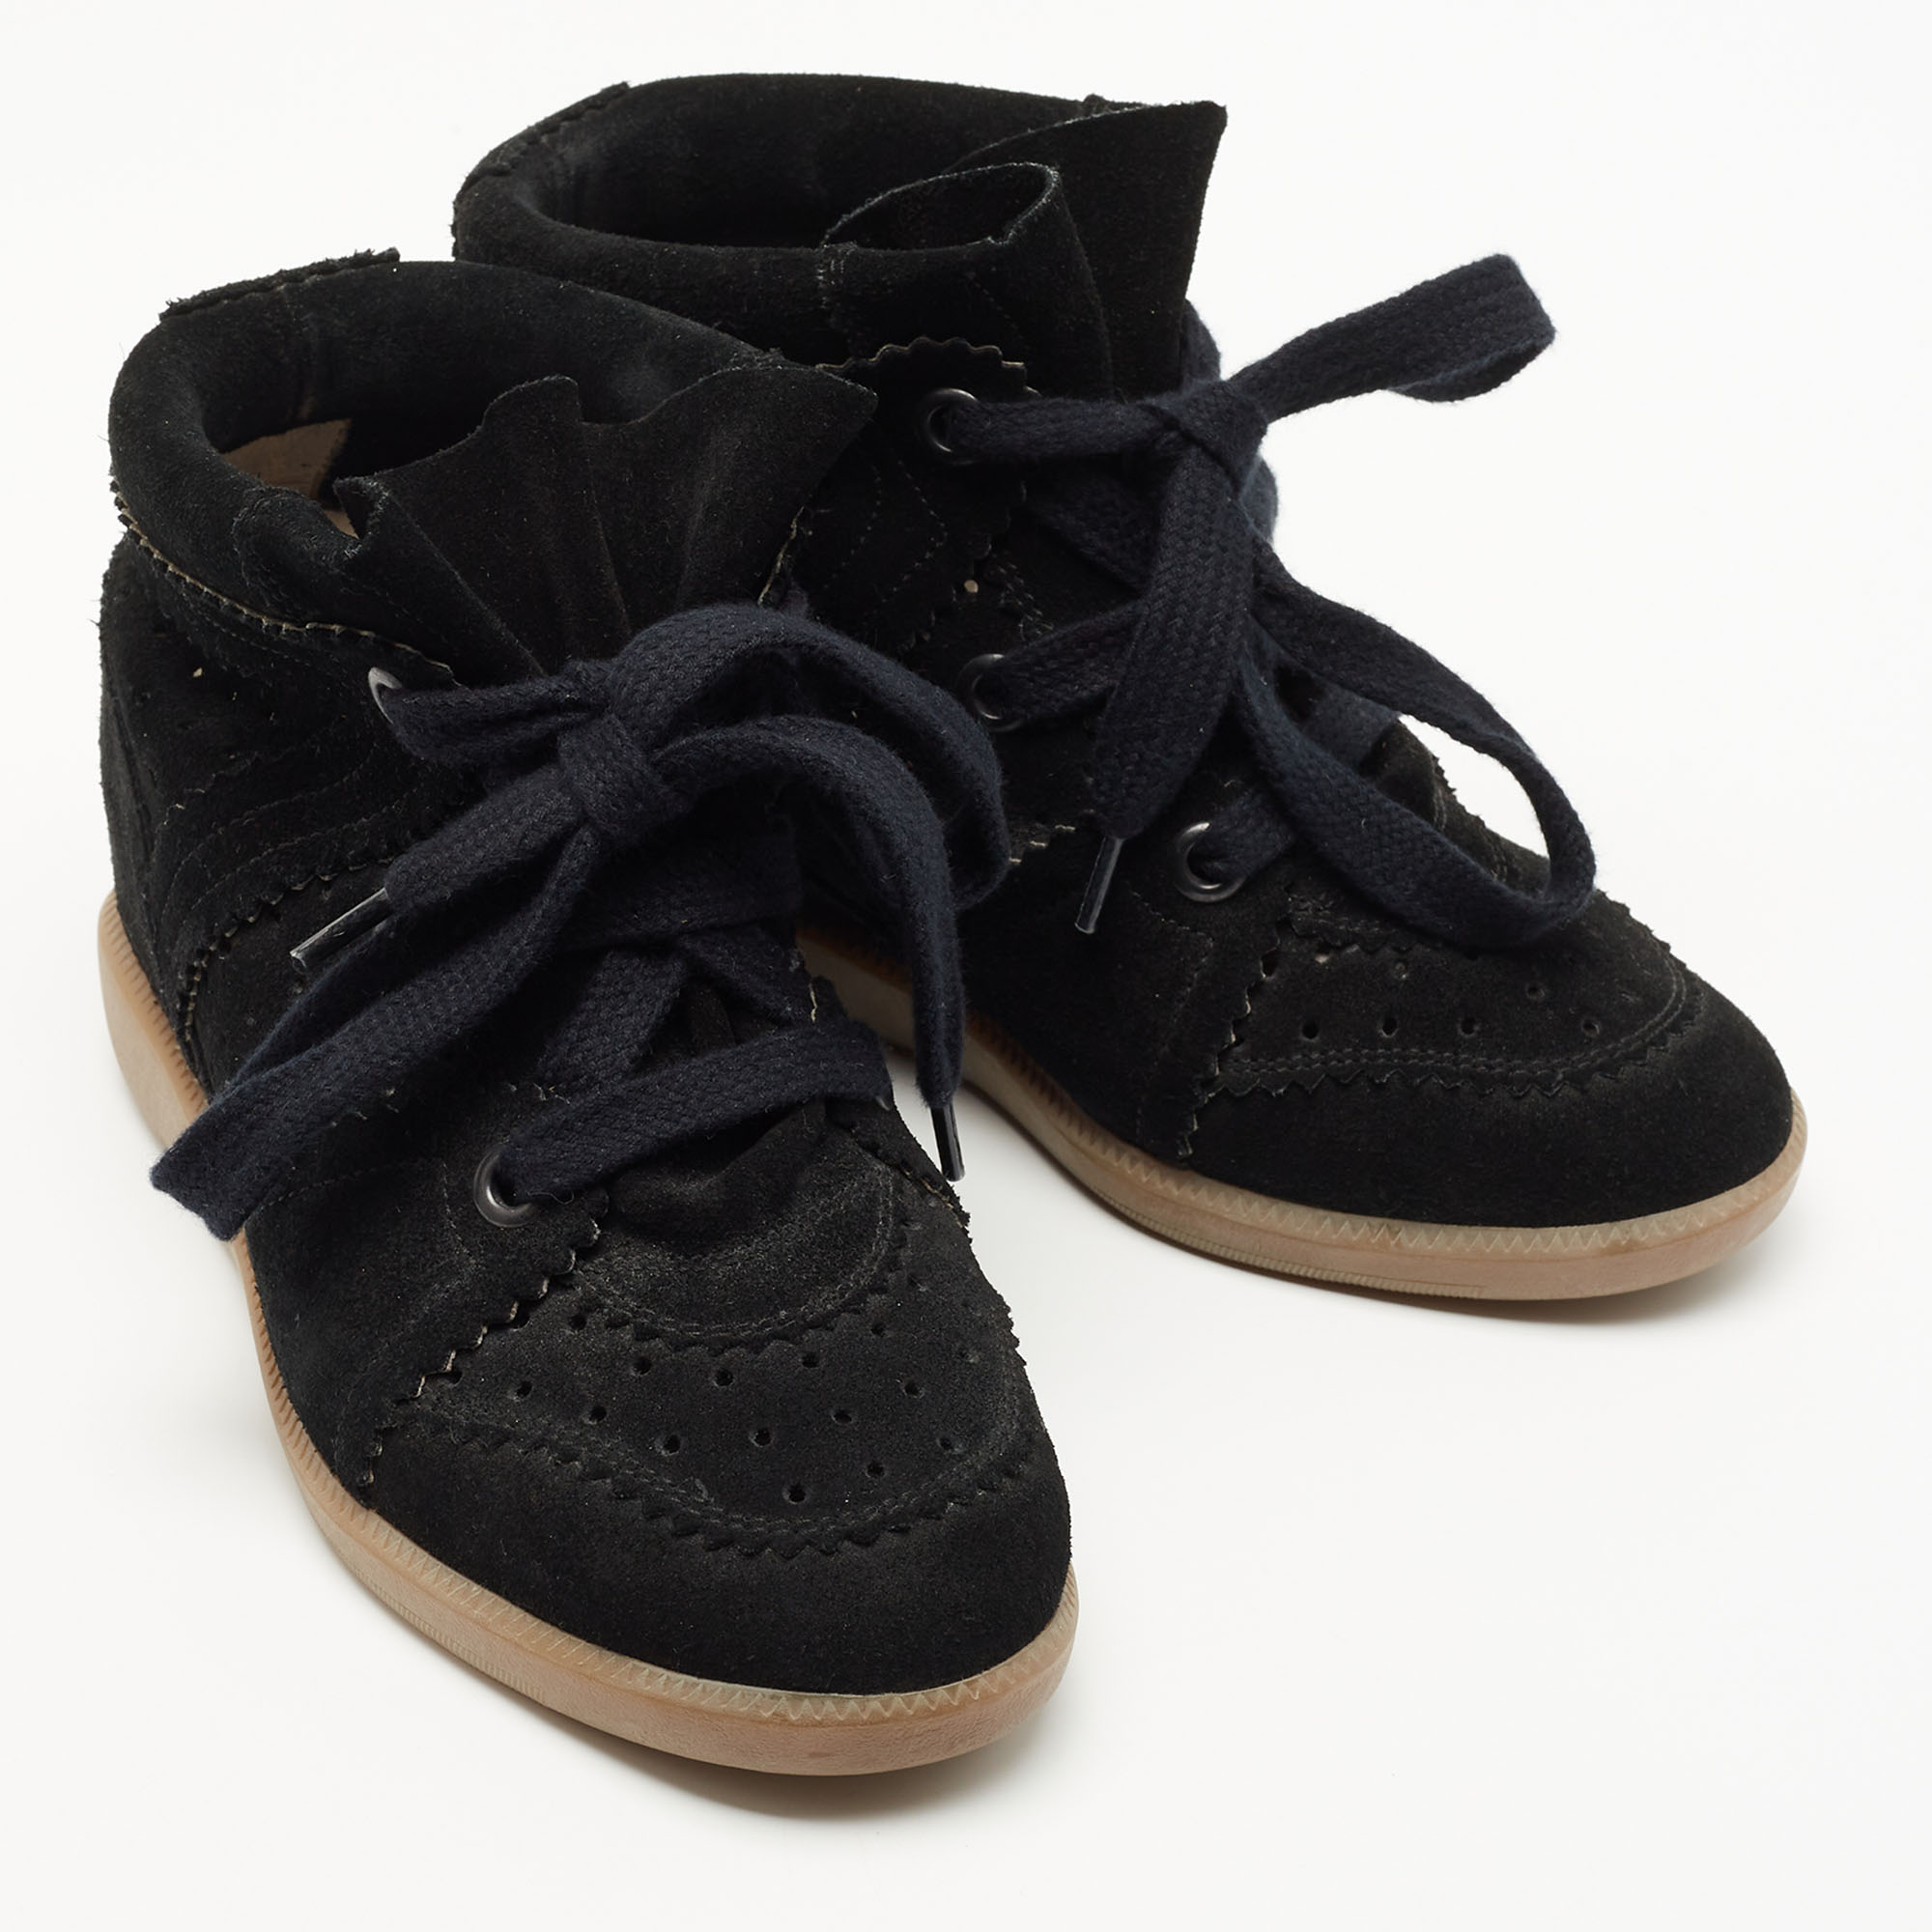 Isabel Marant Black Suede Bobby Wedge Sneakers Size 36